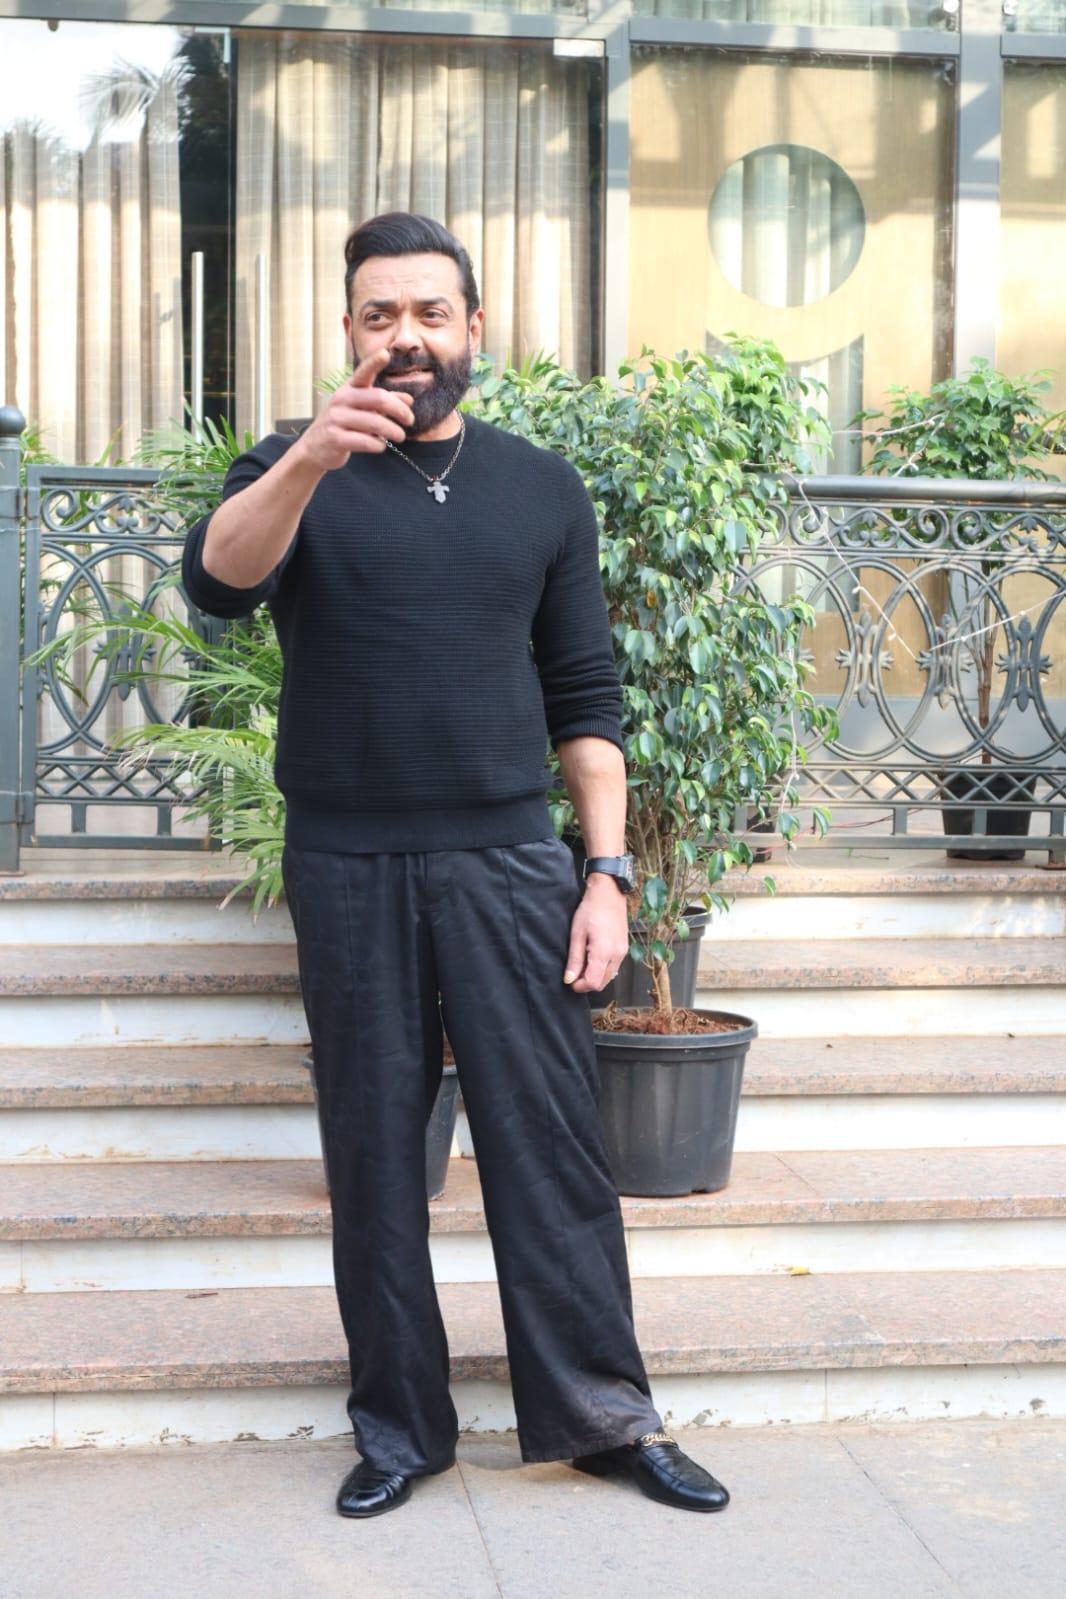 Bobby Deol, who has been receiving rave reviews for 'Animal', was clicked in the city